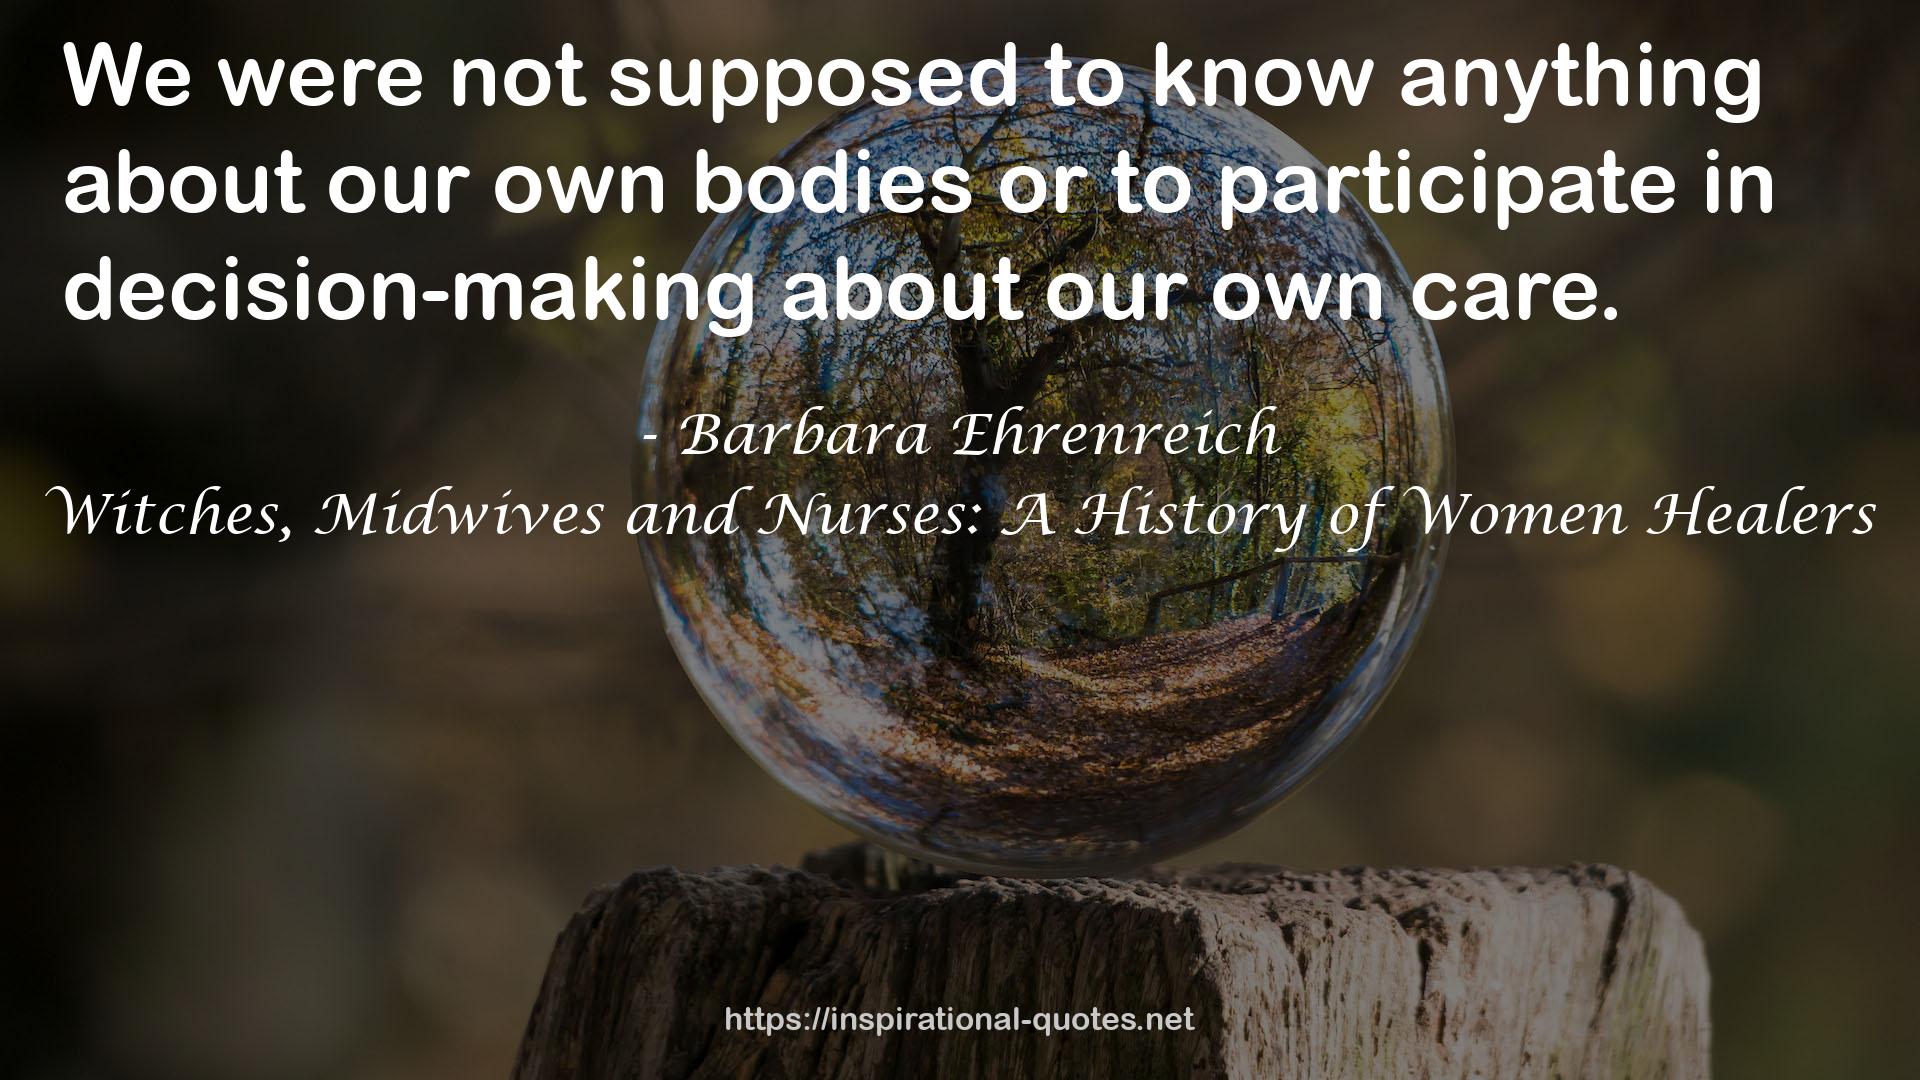 Witches, Midwives and Nurses: A History of Women Healers QUOTES